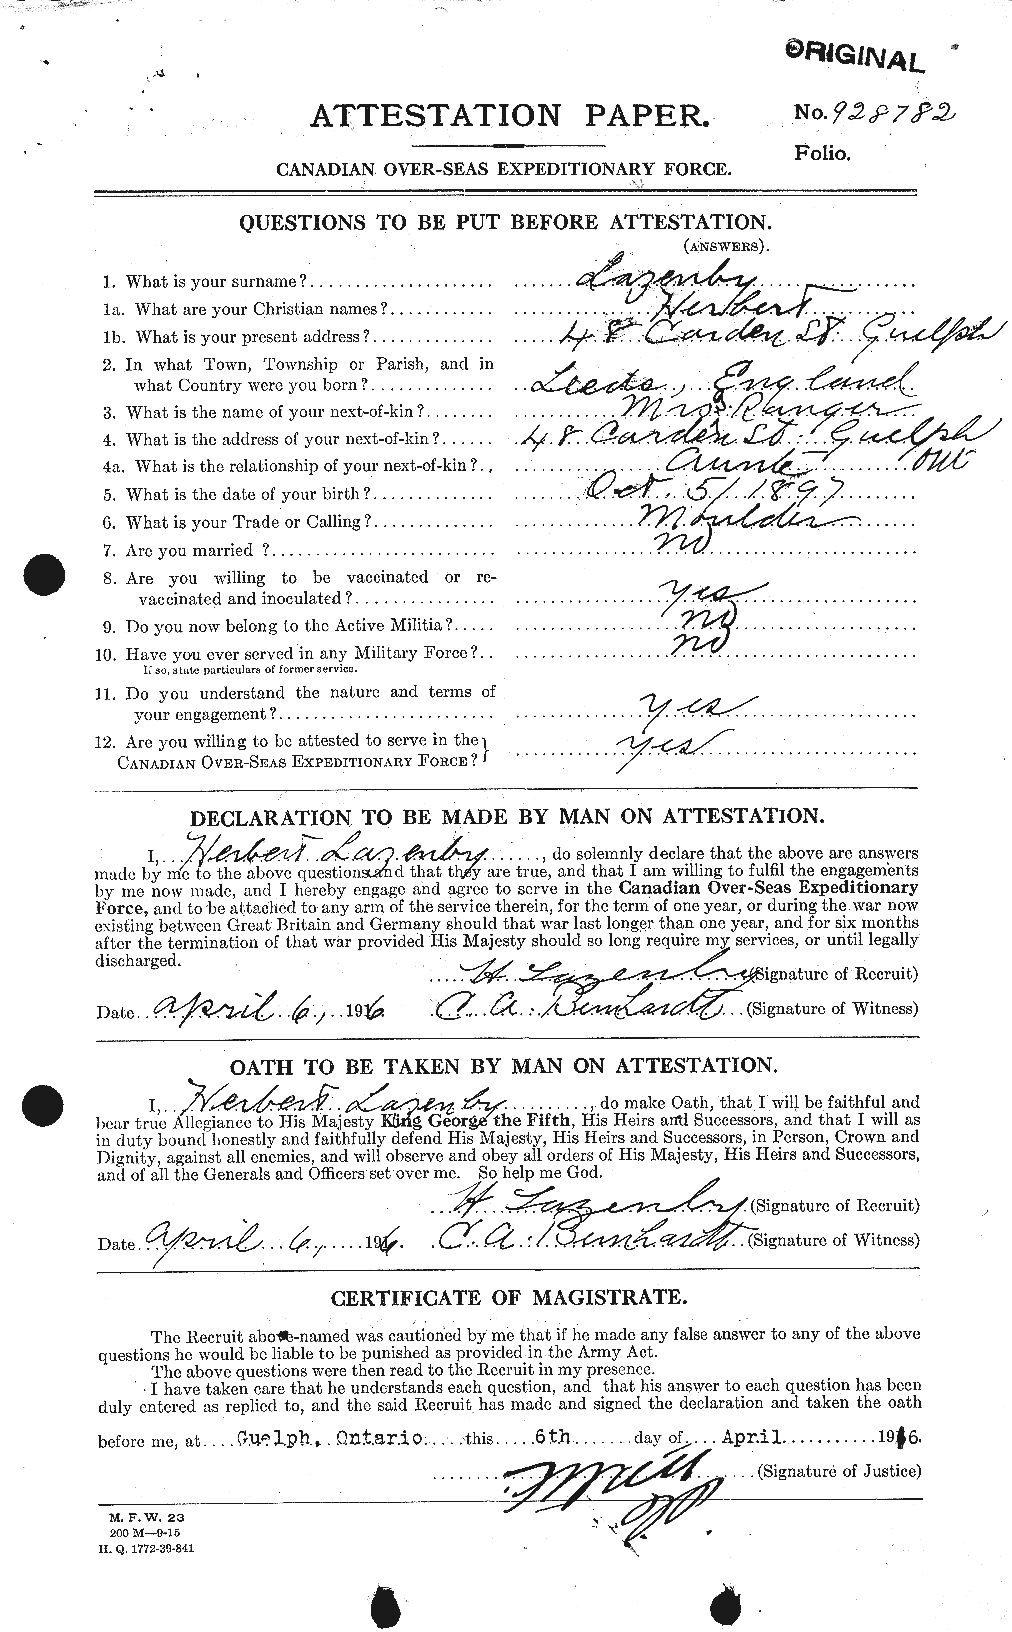 Personnel Records of the First World War - CEF 453206a